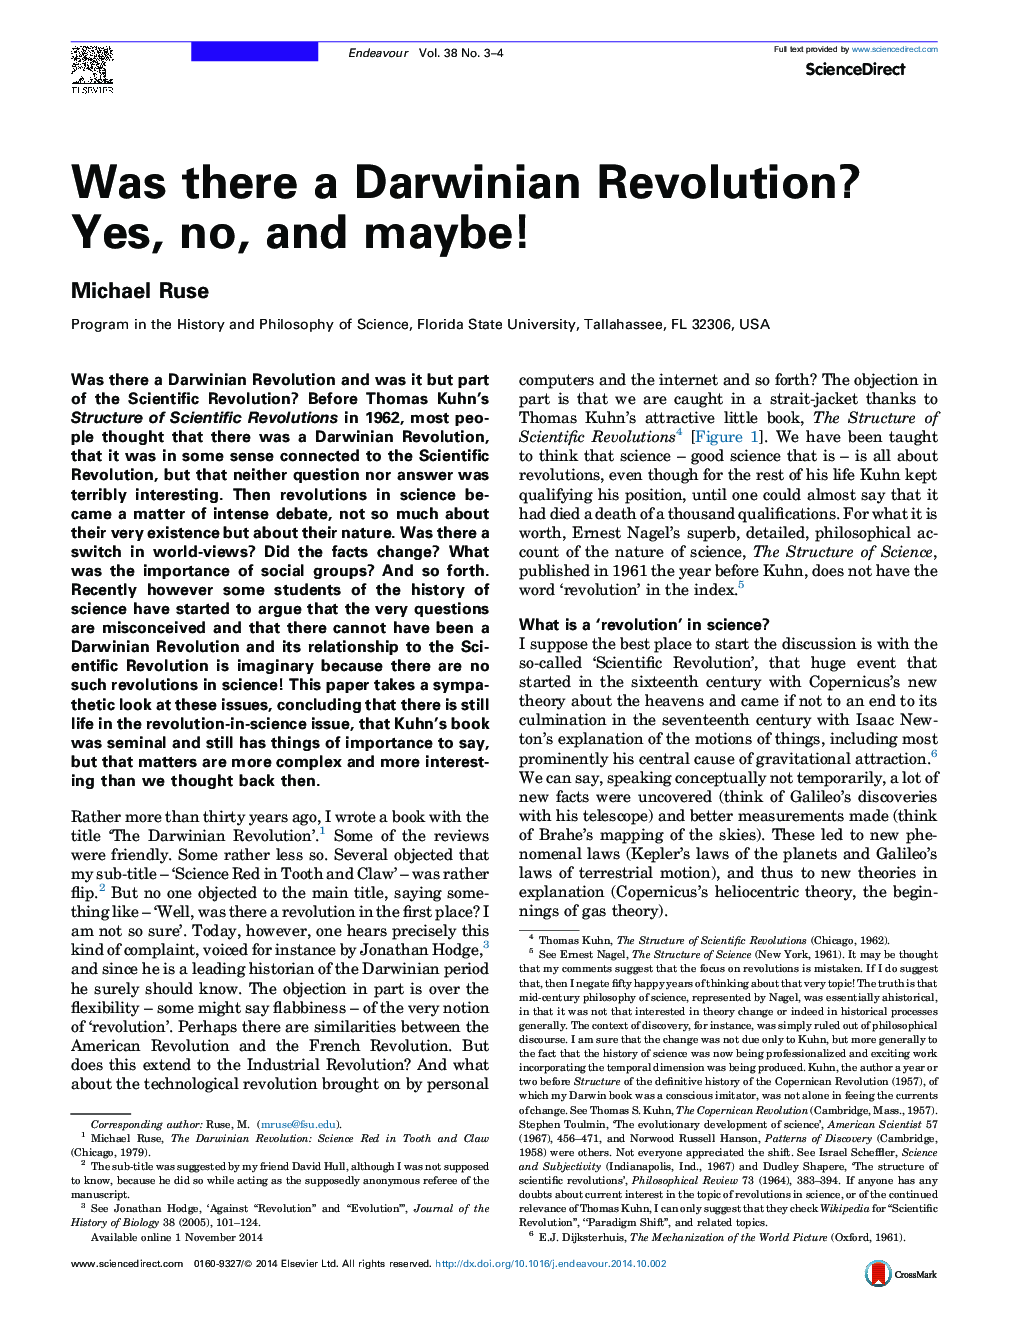 Was there a Darwinian Revolution? Yes, no, and maybe!